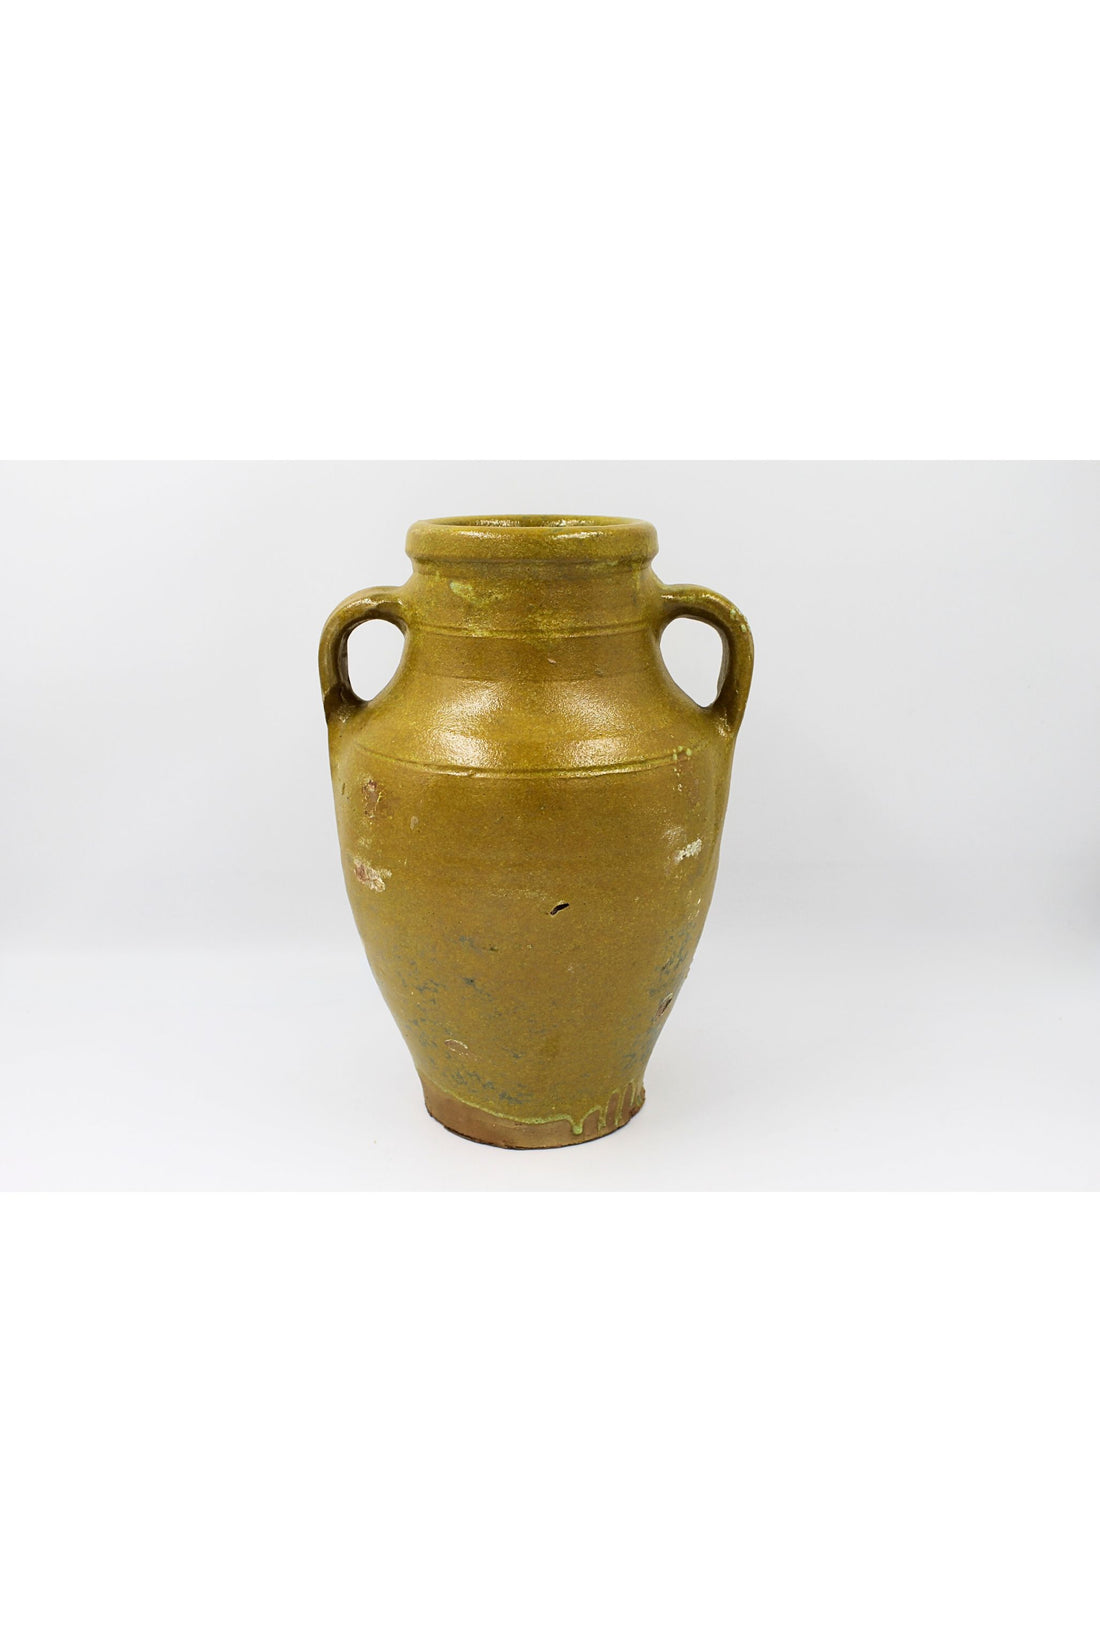 Cottage Crafted 2 Handle Jug, Yellow